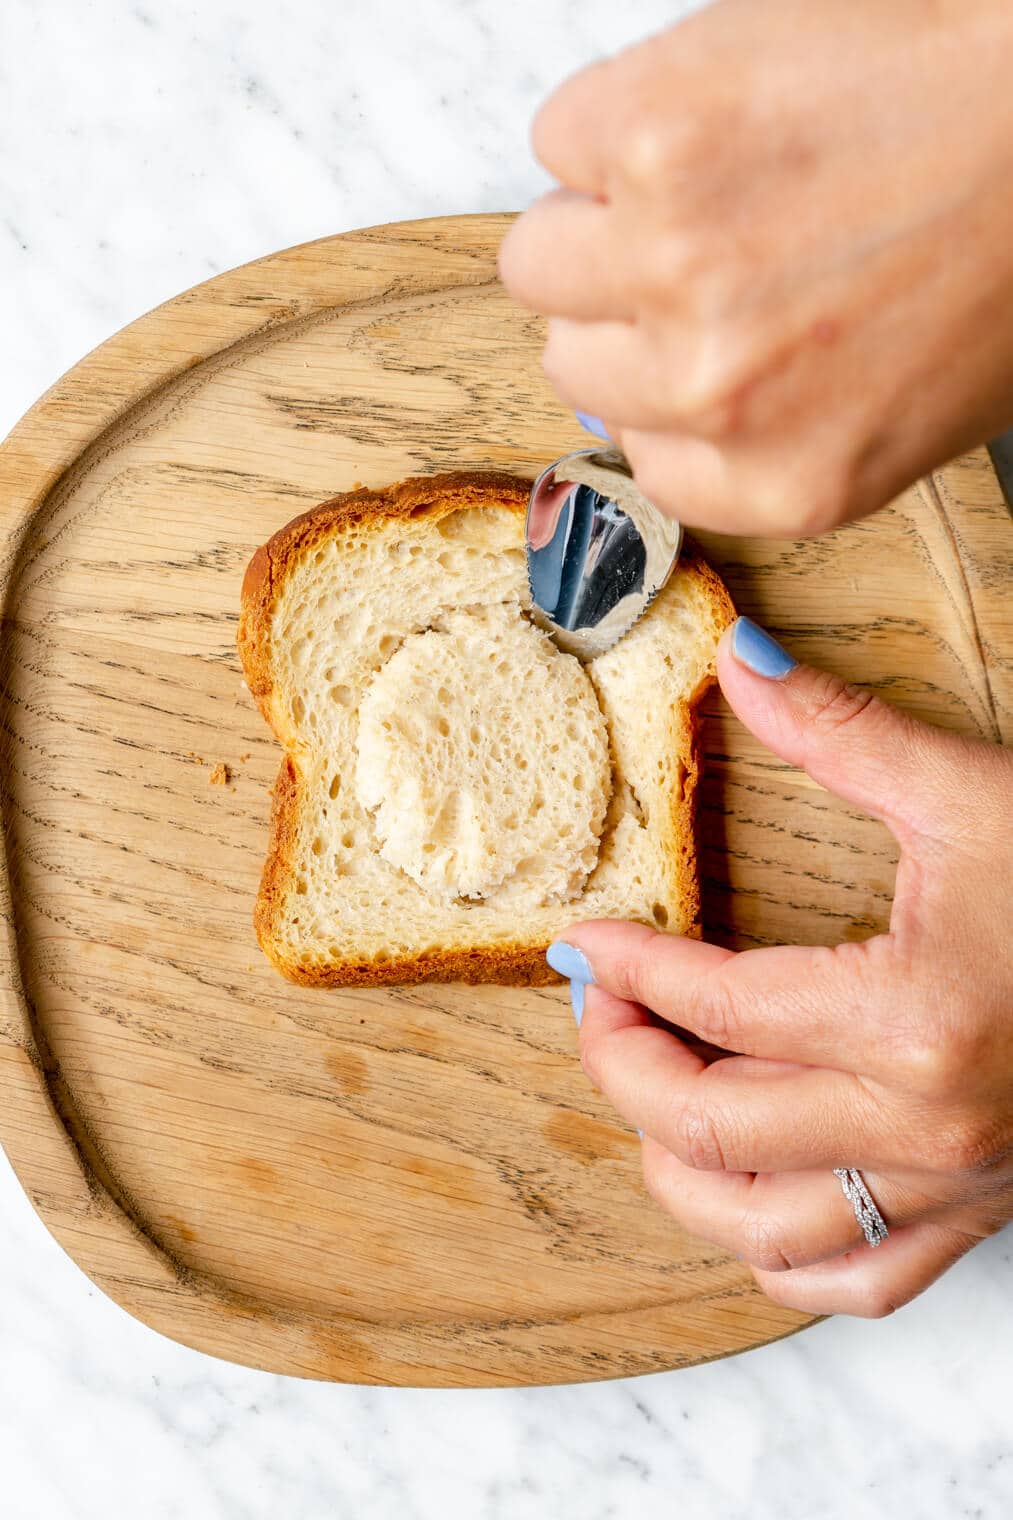 Hand holding a spoon cutting out a circle in a slice of bread on a wooden cutting board.